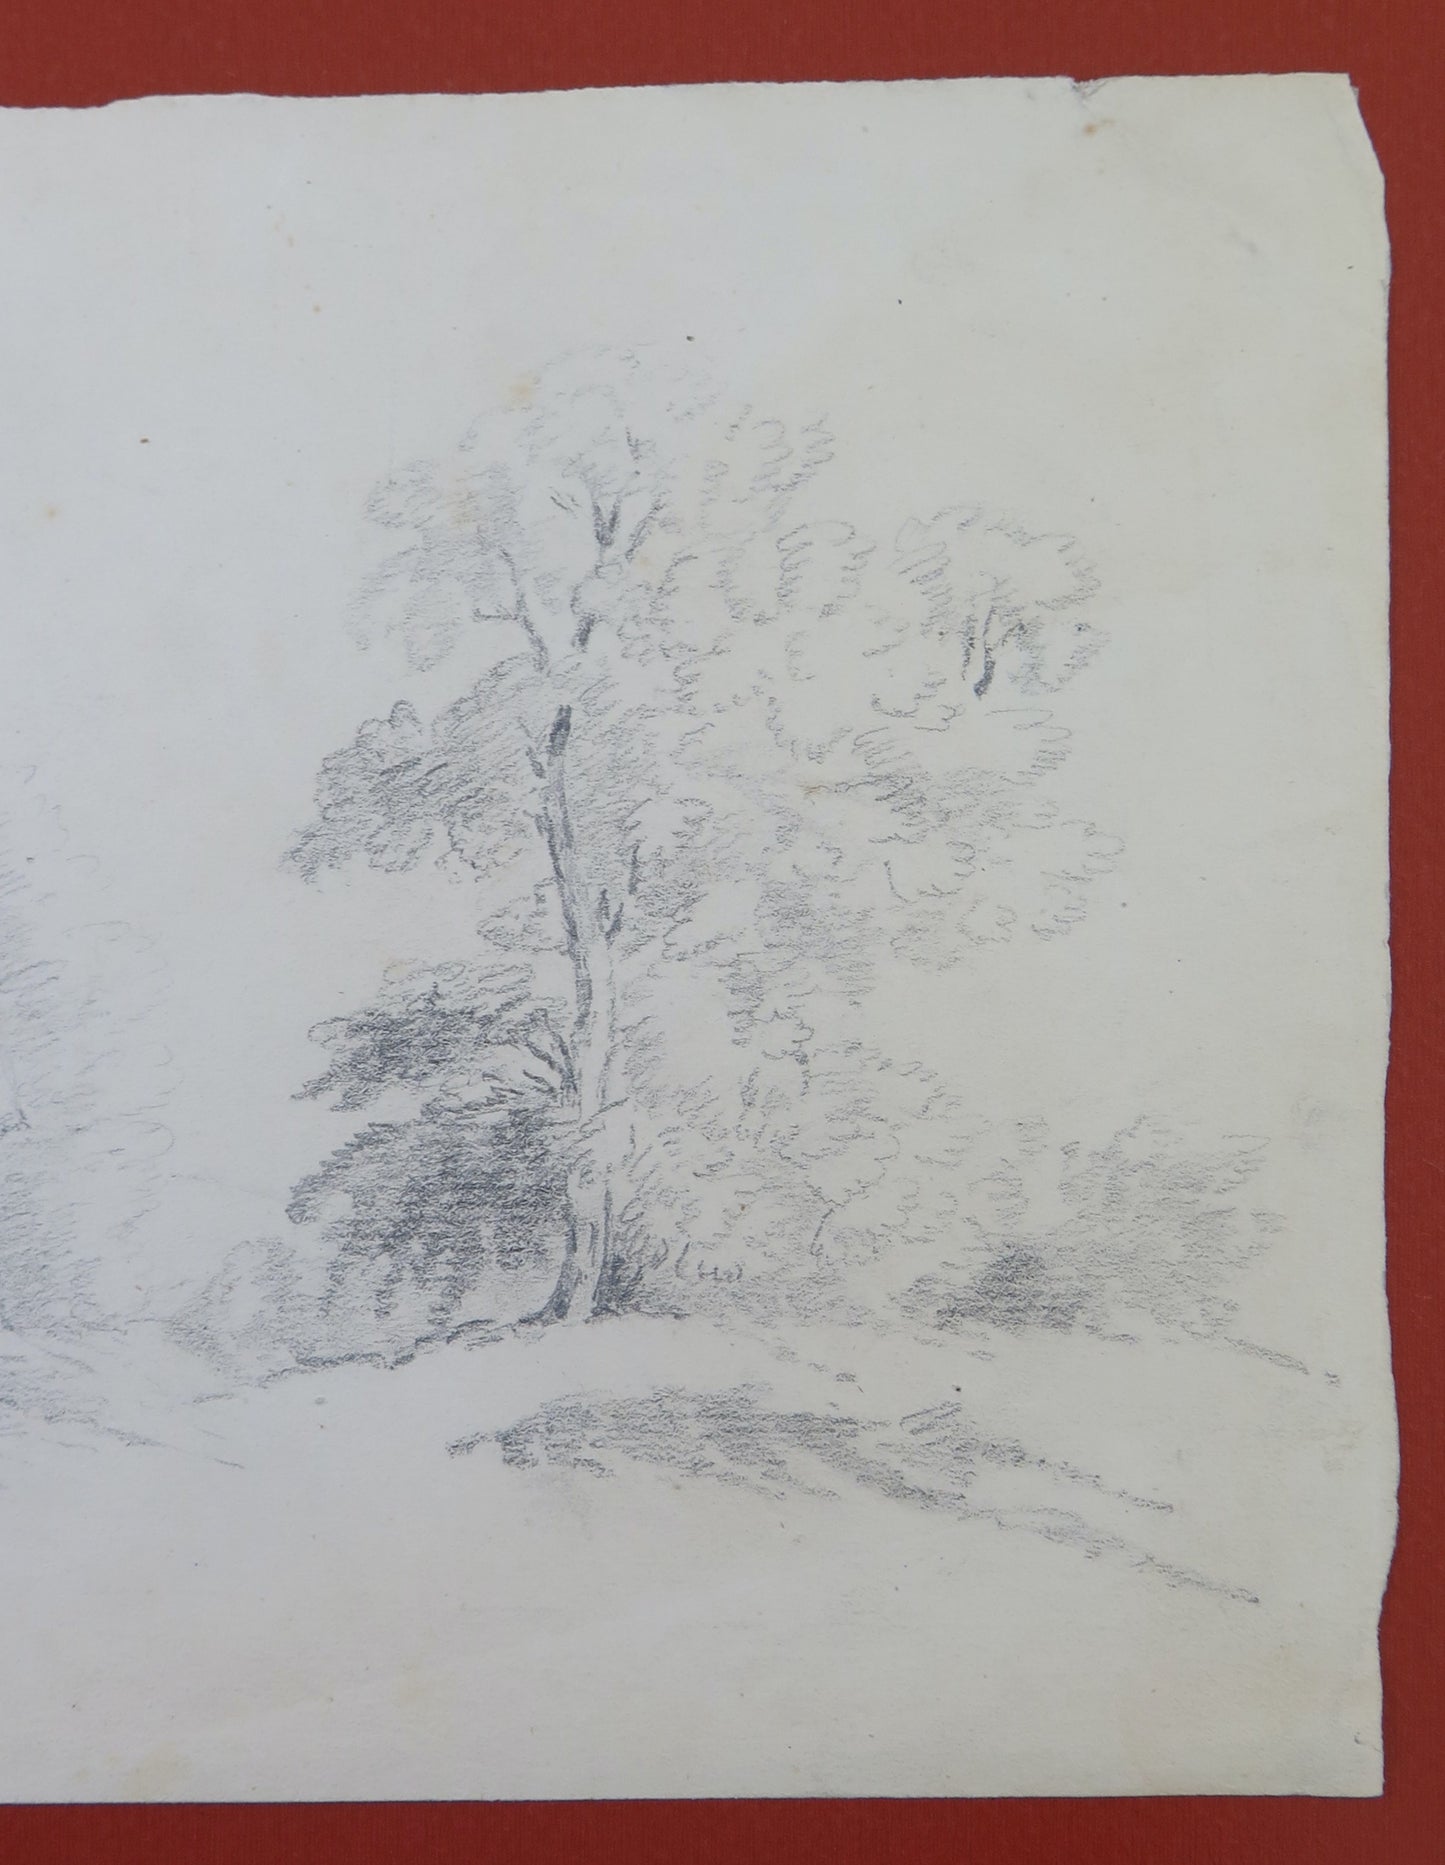 ANCIENT PENCIL DRAWING ON COUNTRYSIDE PAPER SIGNED PAINTING BM53.5b